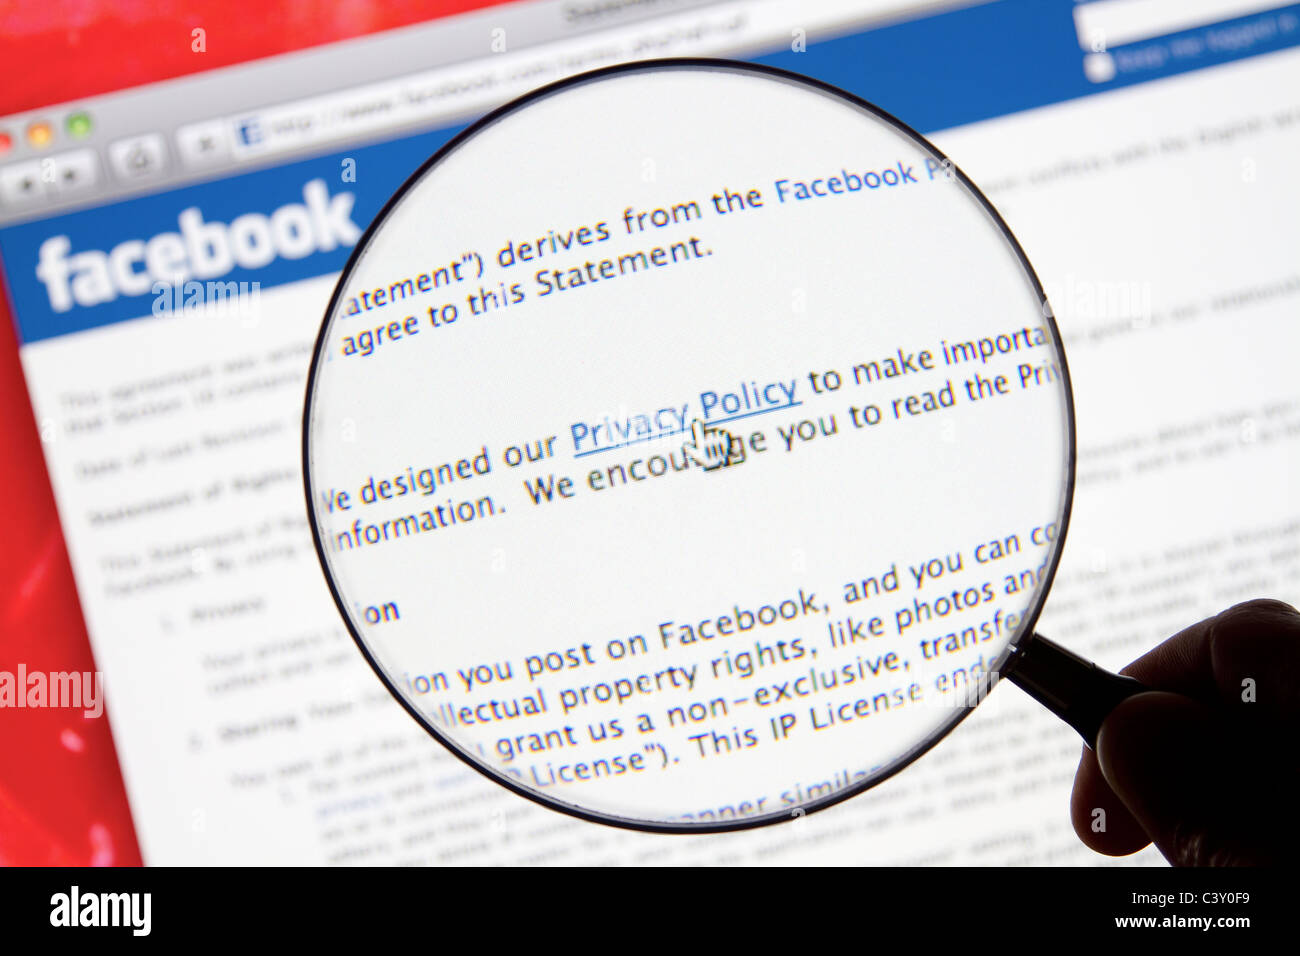 Facebook website page with Facebook logo and magnifying glass showing privacy policy. Stock Photo